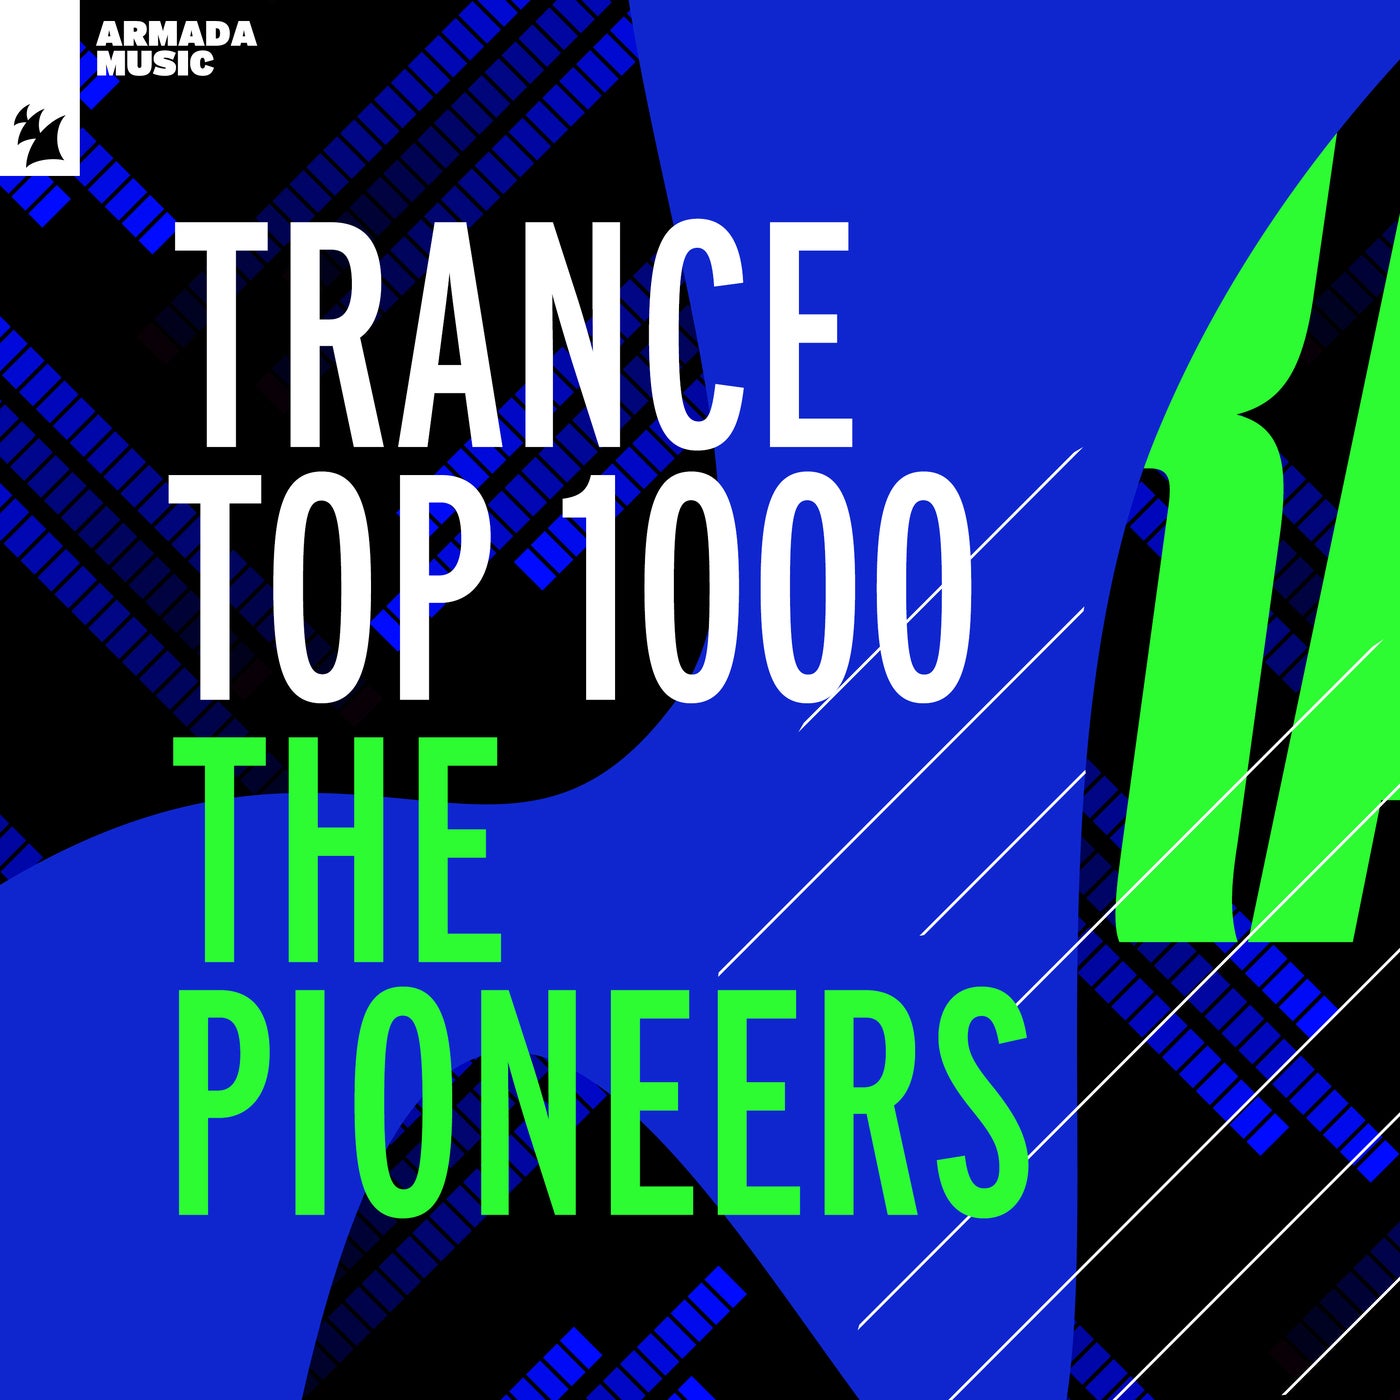 Trance Top 1000 - The Pioneers - Extended Versions